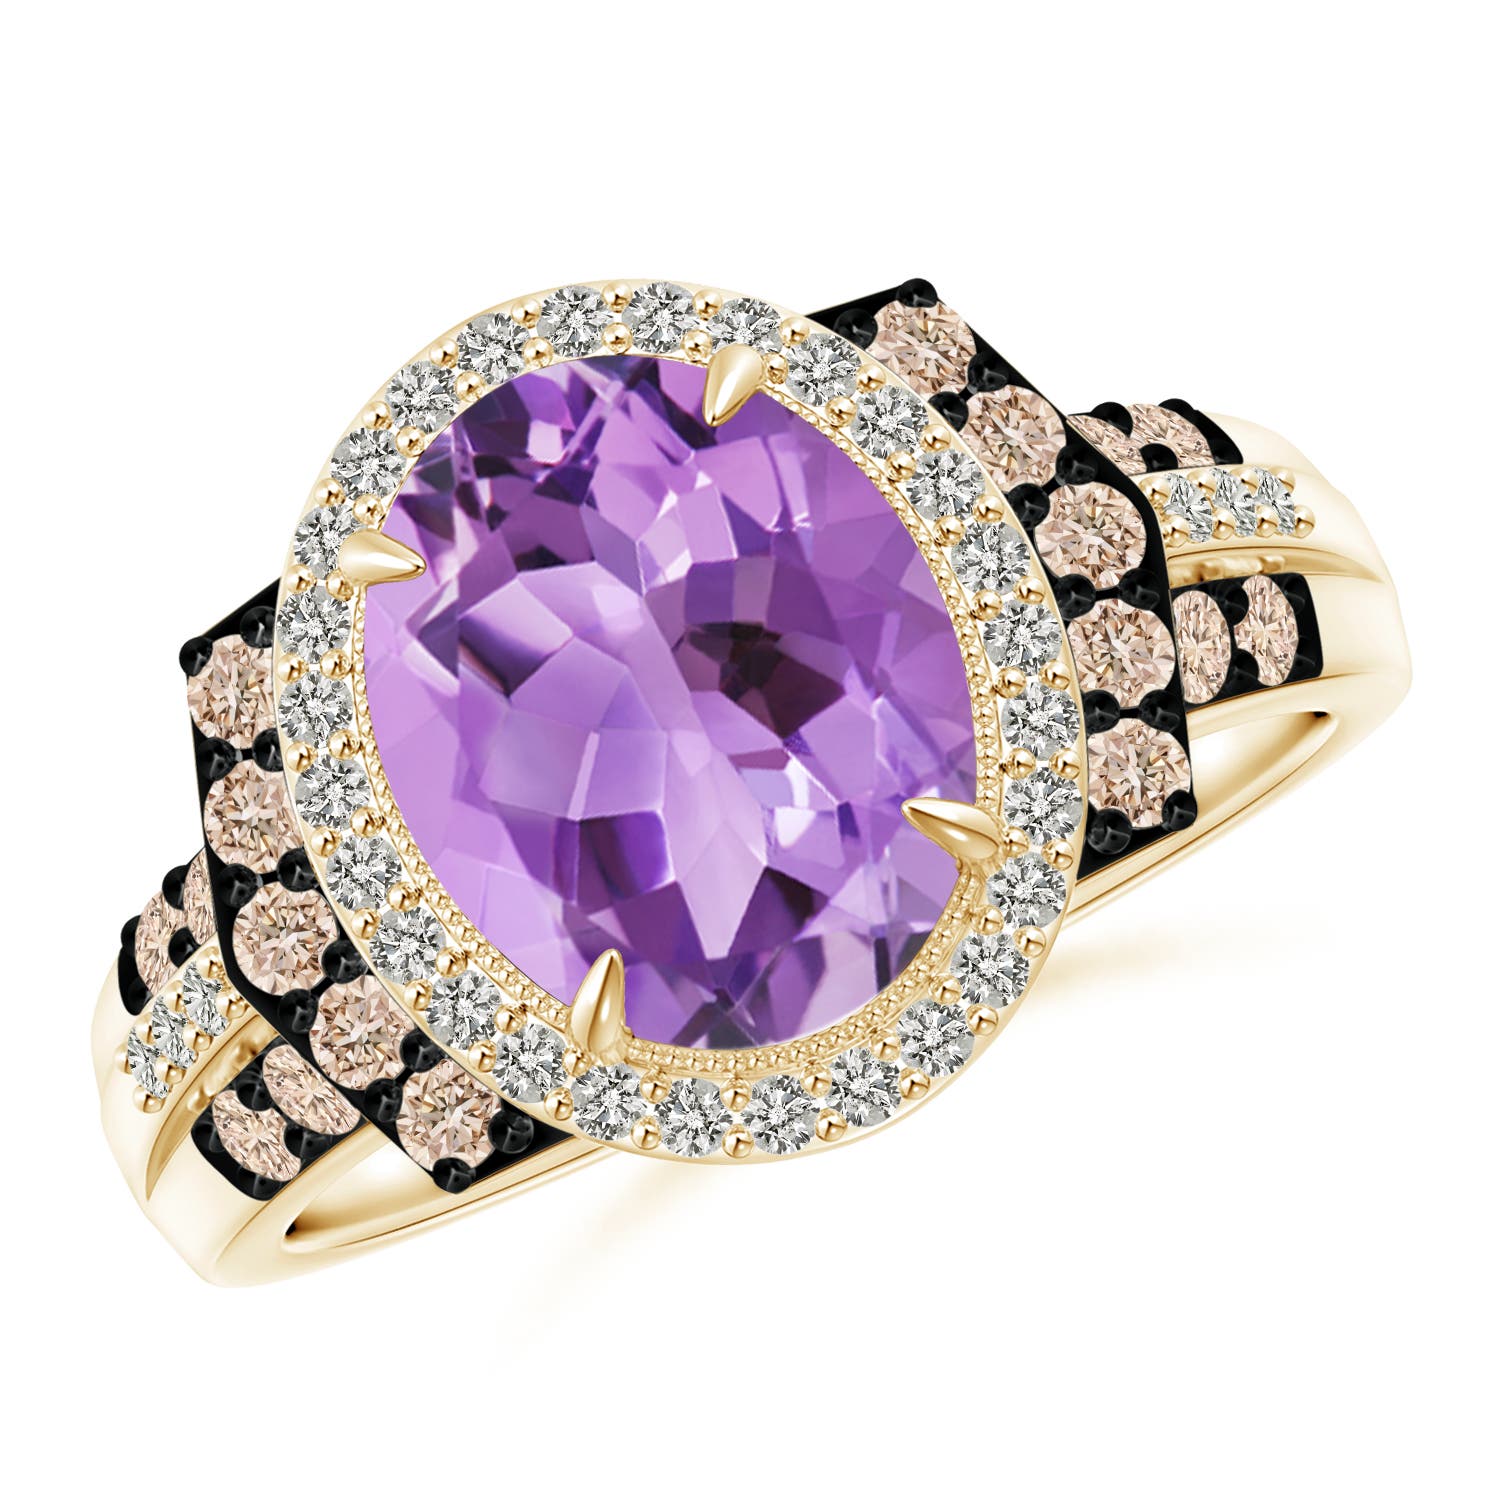 A - Amethyst / 2.81 CT / 14 KT Yellow Gold